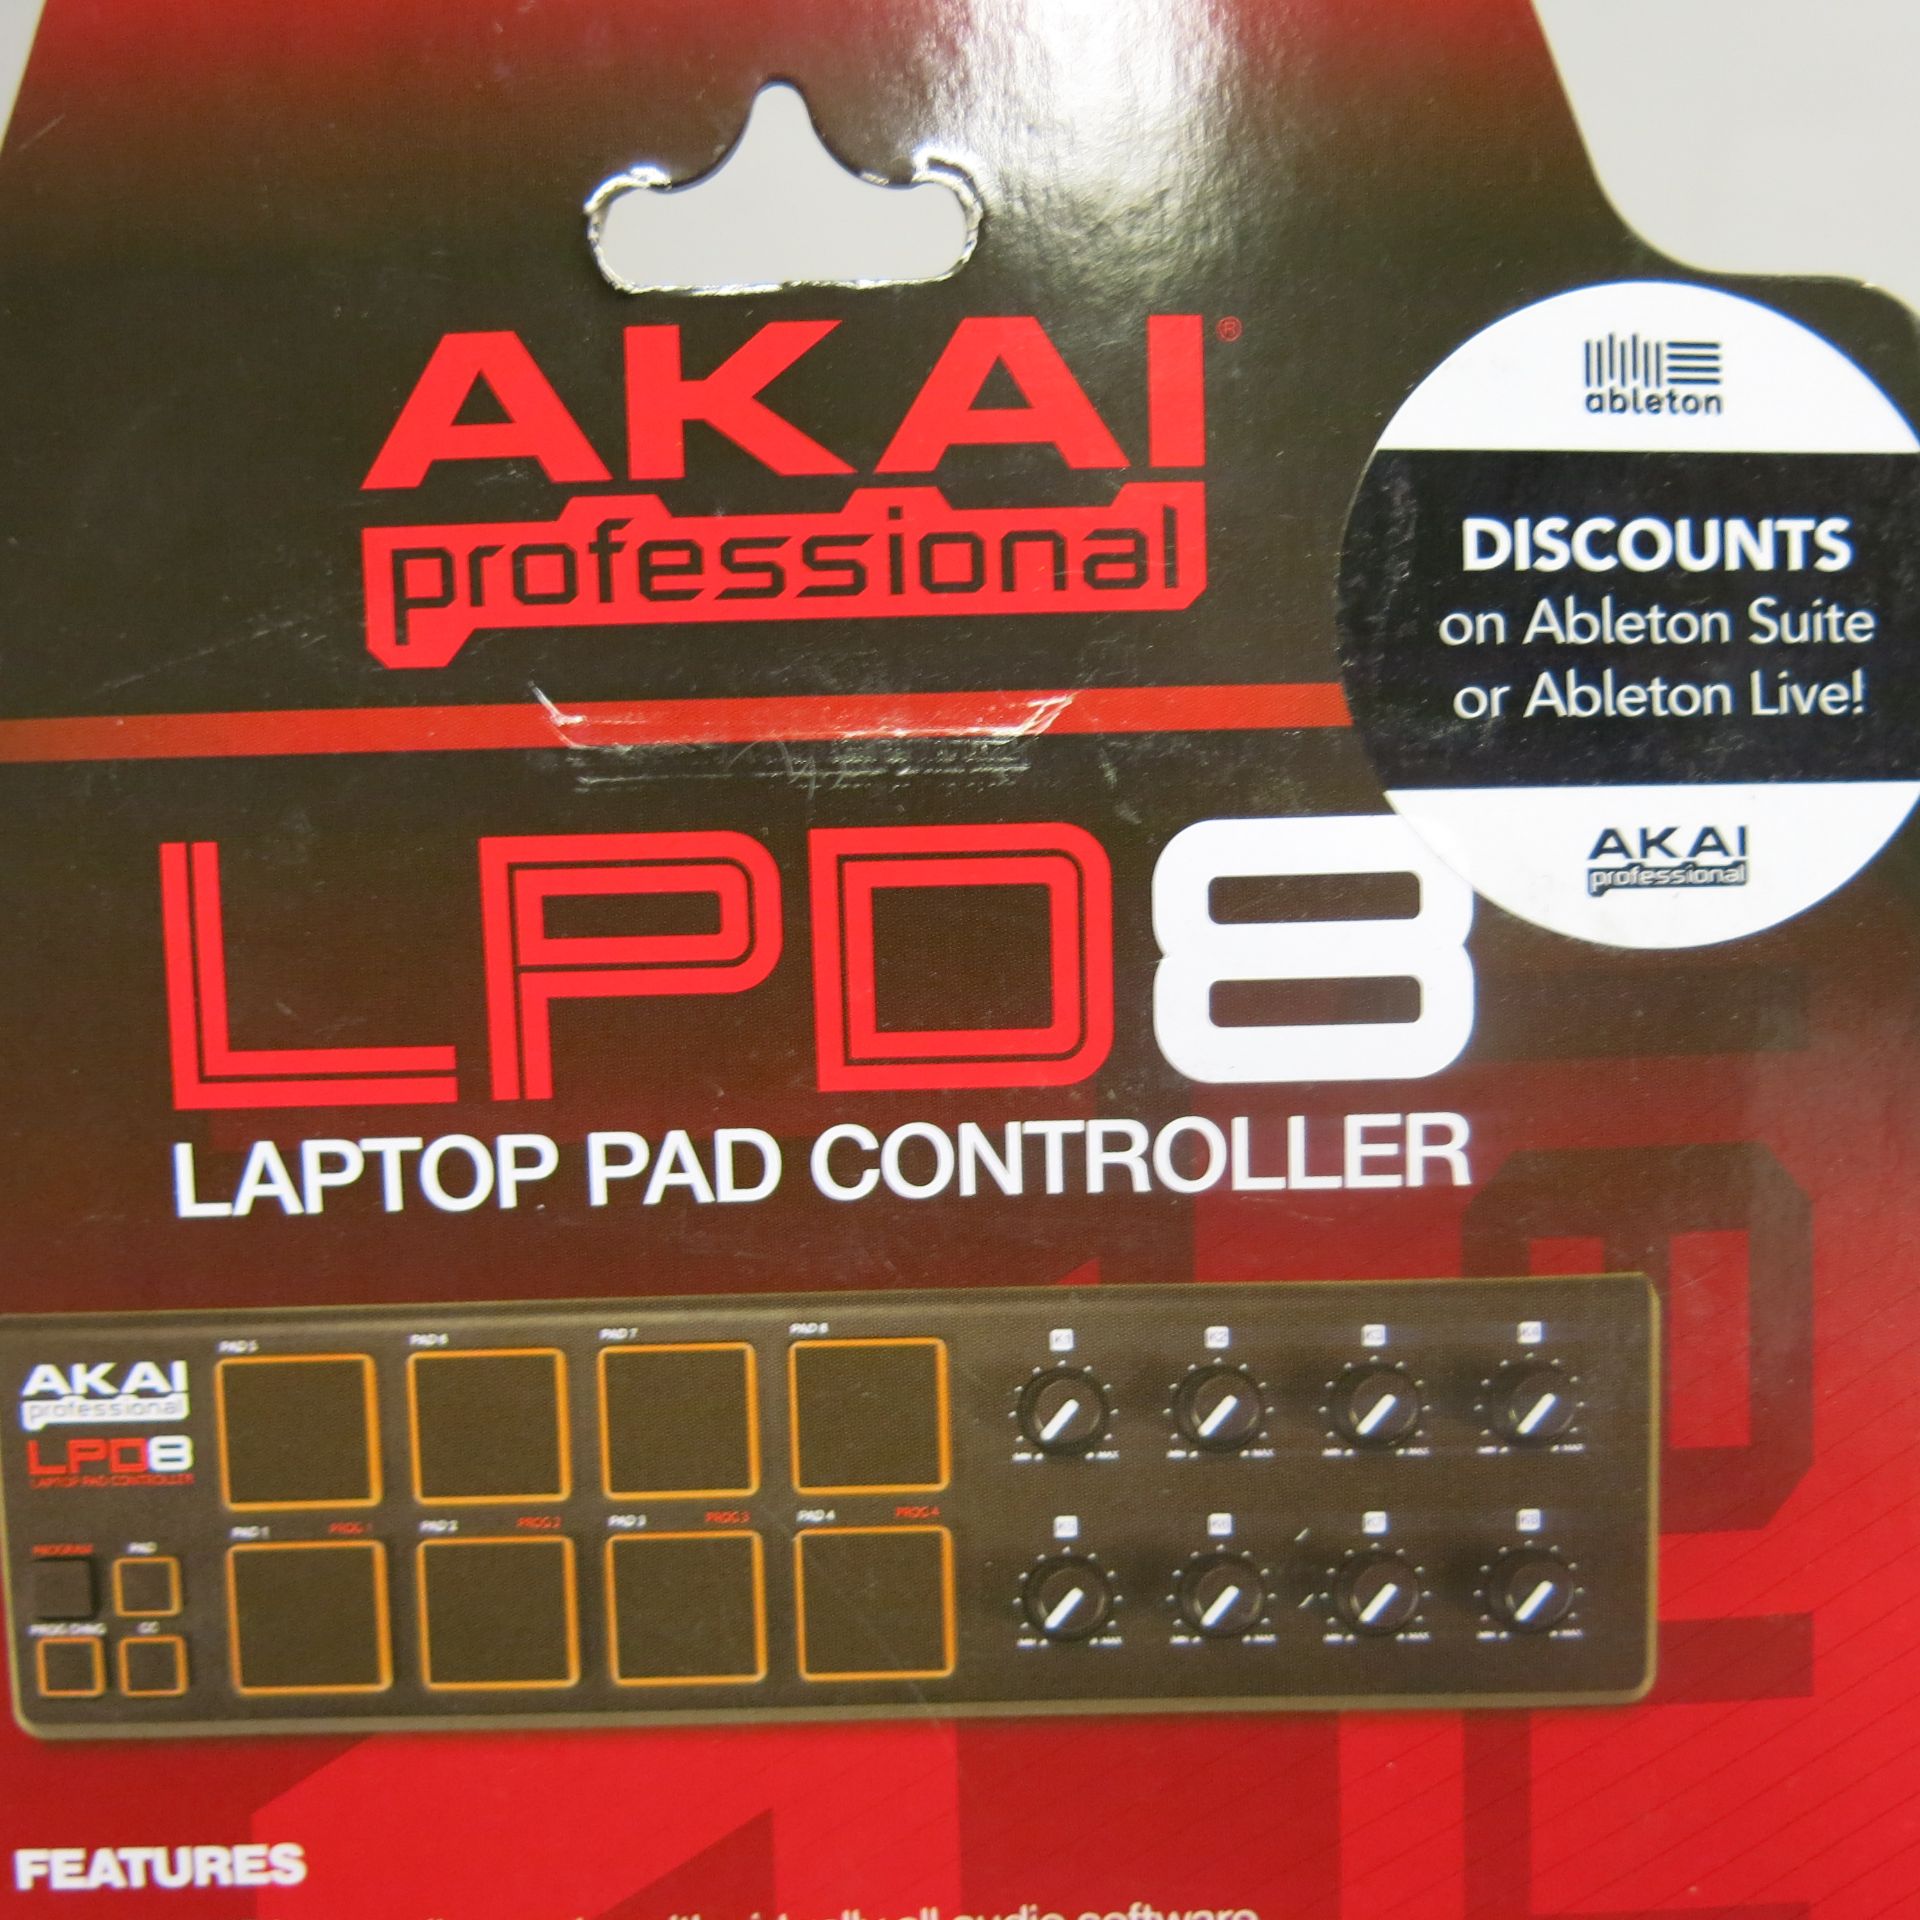 Akai Professional LPD8 Laptop Pad Controller, New/Packaged - Image 2 of 2